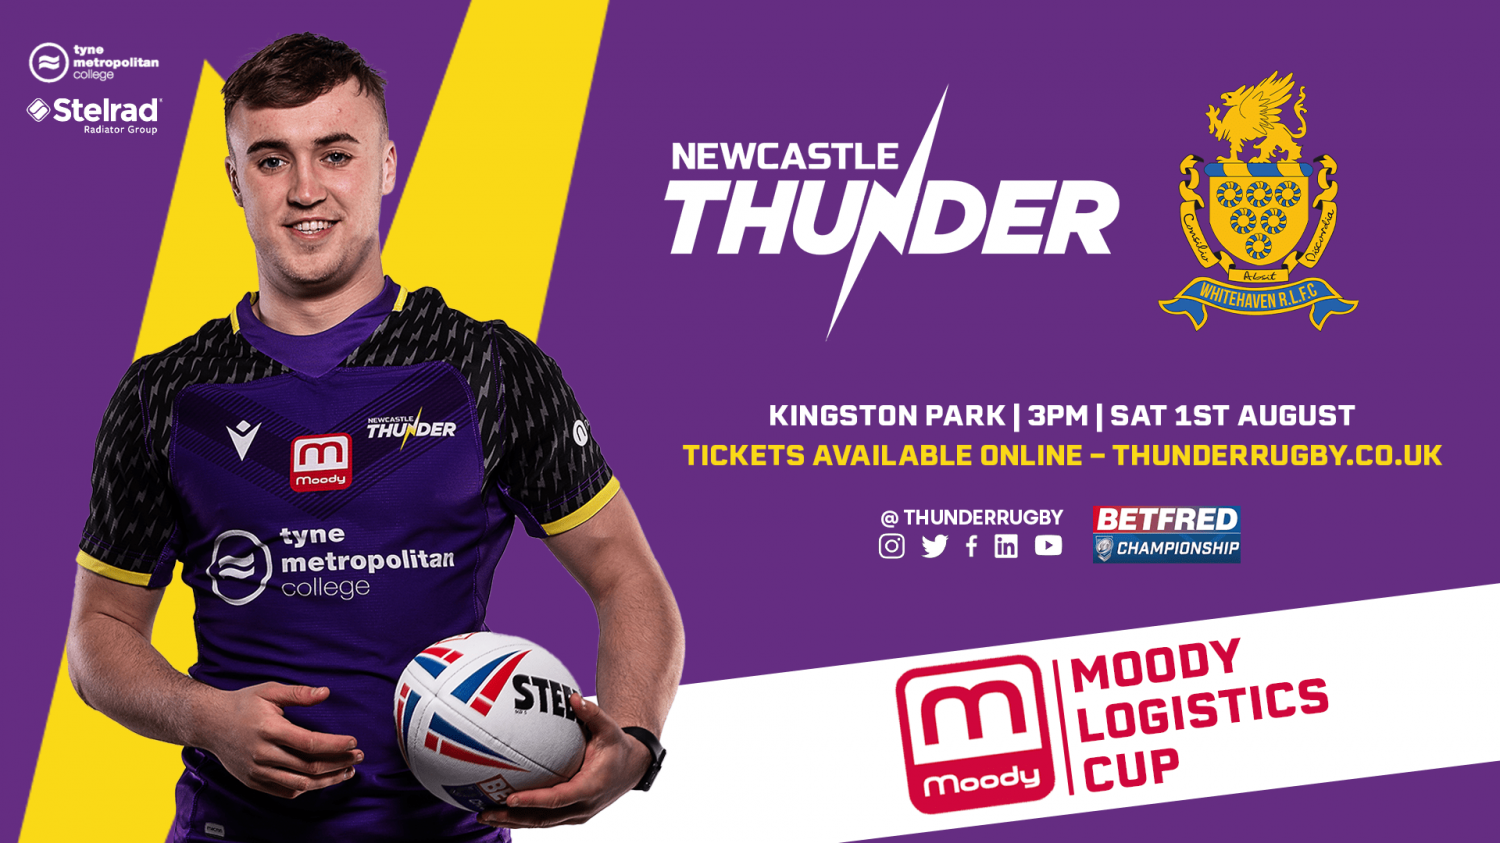 NEWCASTLE THUNDER TICKETS NOW ON SALE